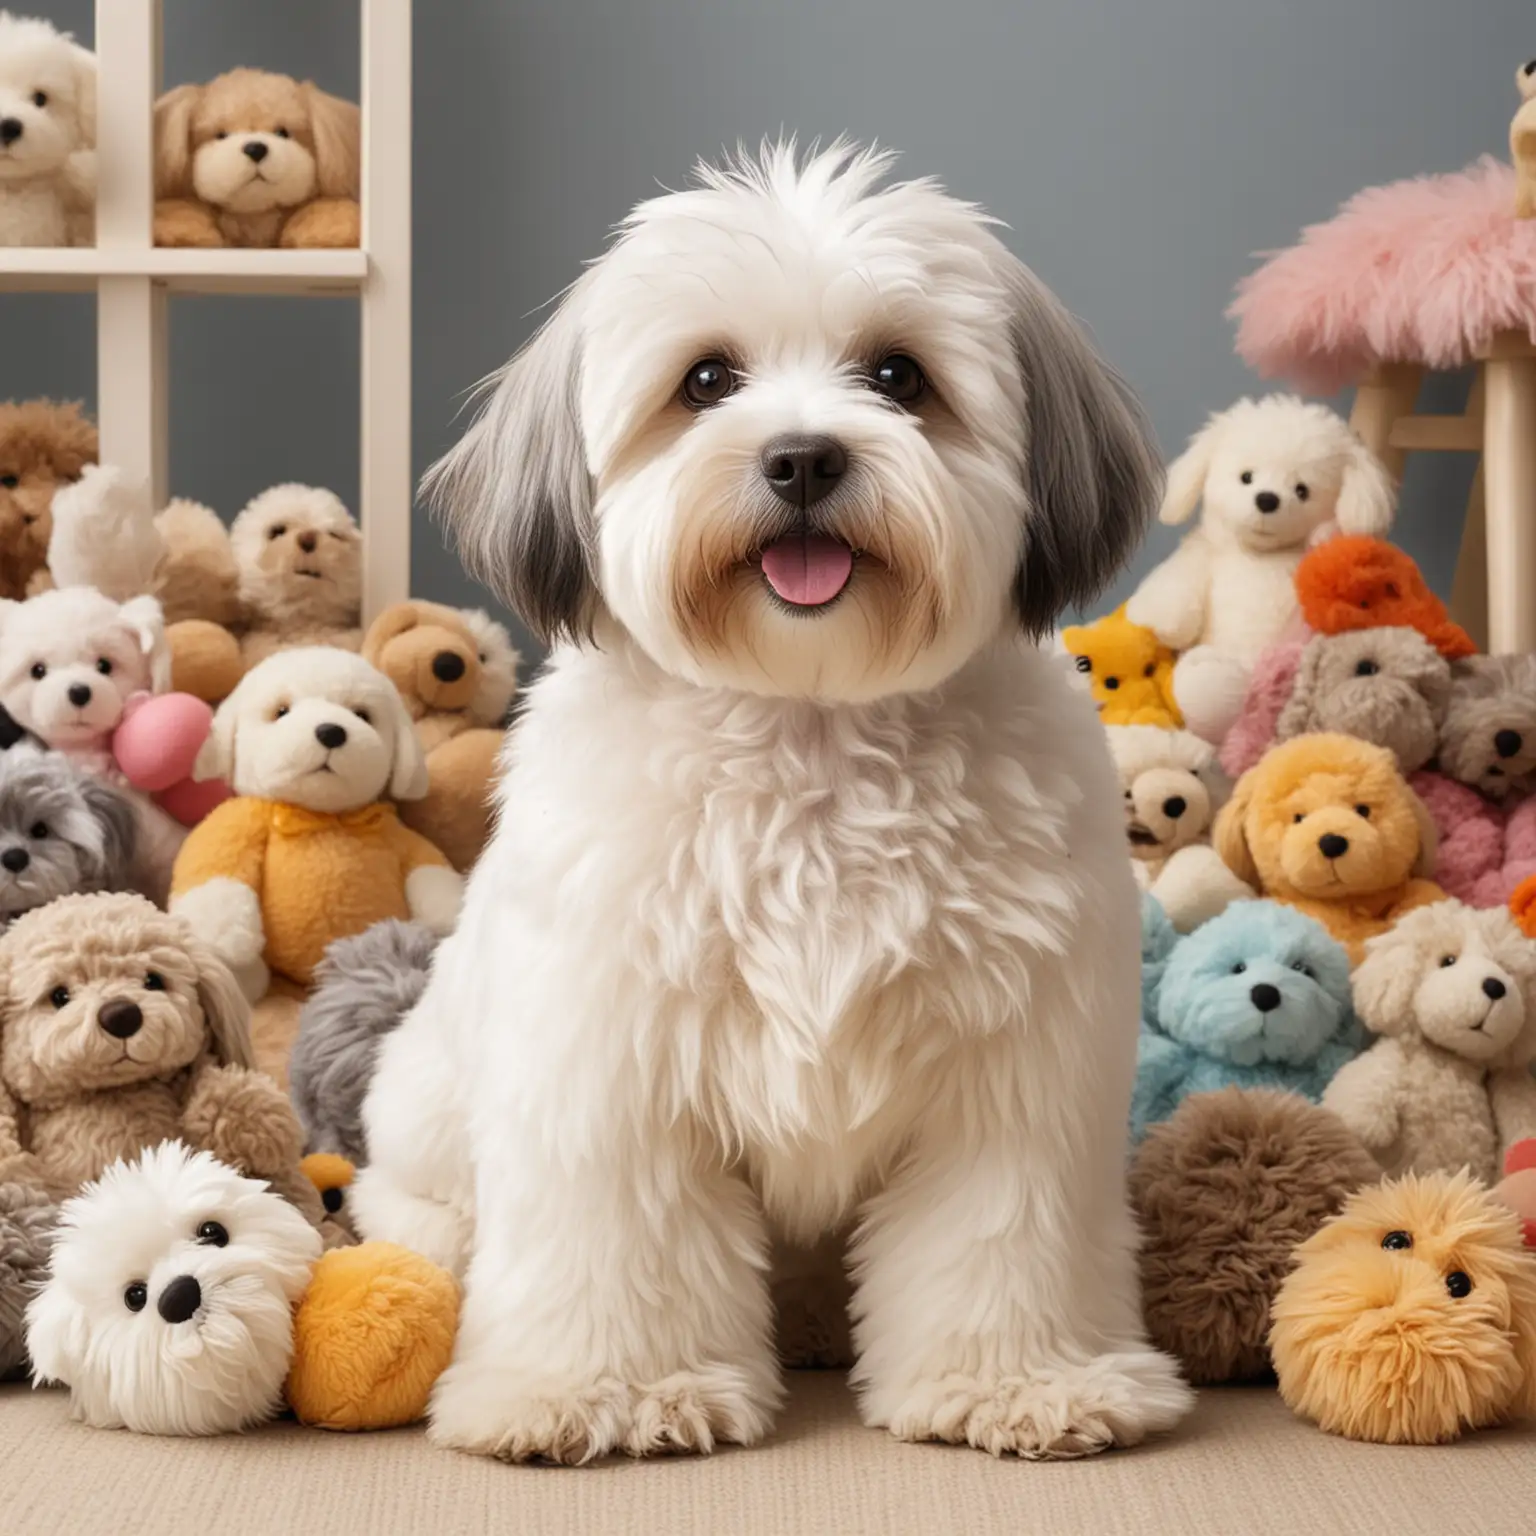 image of a beautifully groomed Havanese sitting amongst some stuffed toys in a playroom, use the same background, make the picture more colorful like the one above